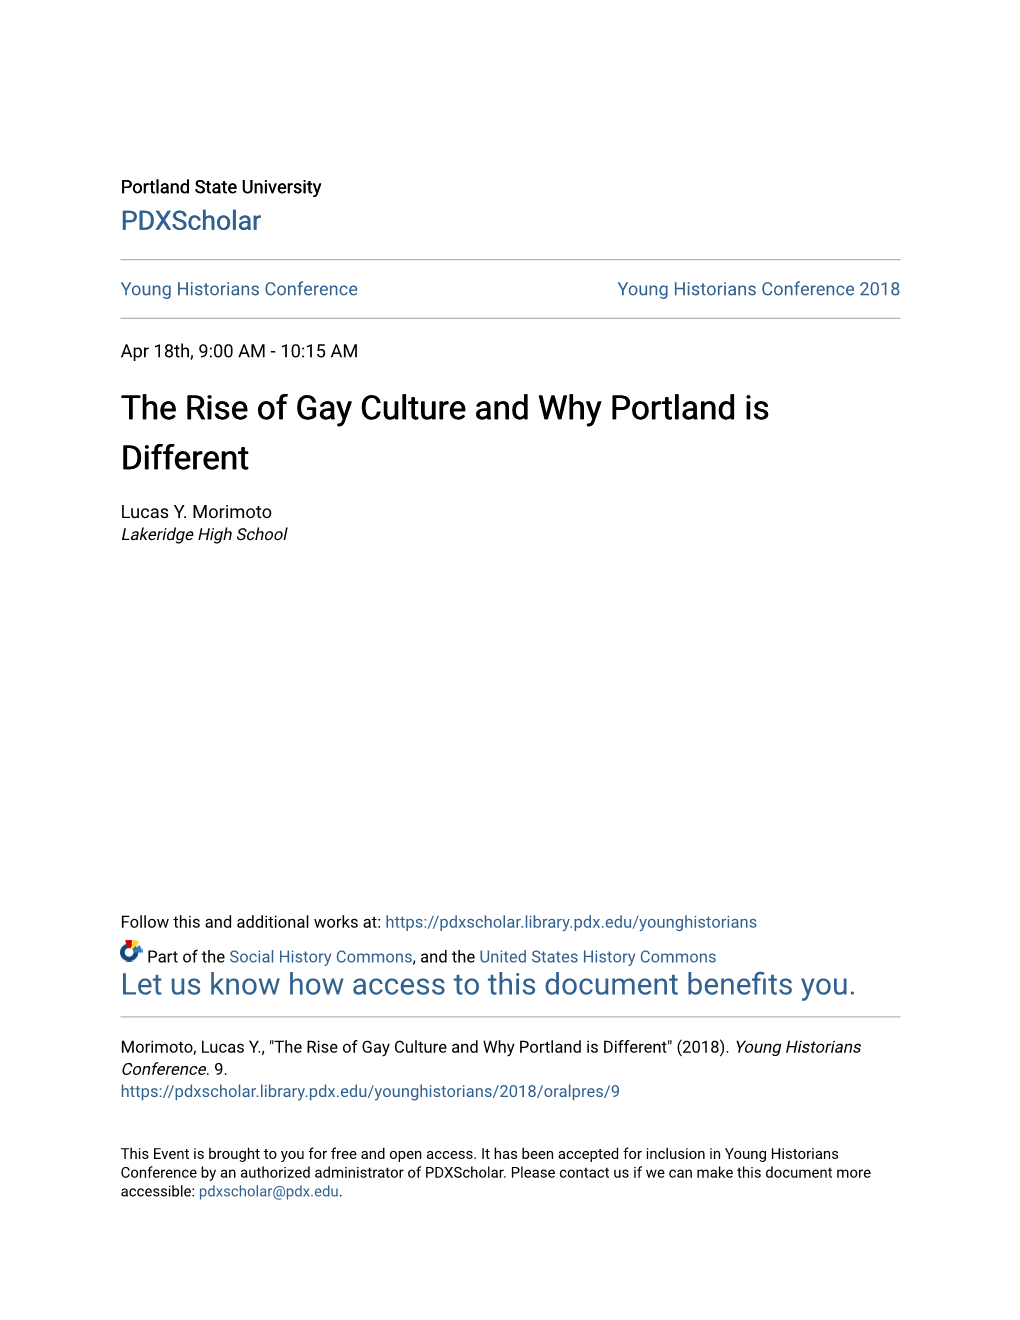 The Rise of Gay Culture and Why Portland Is Different